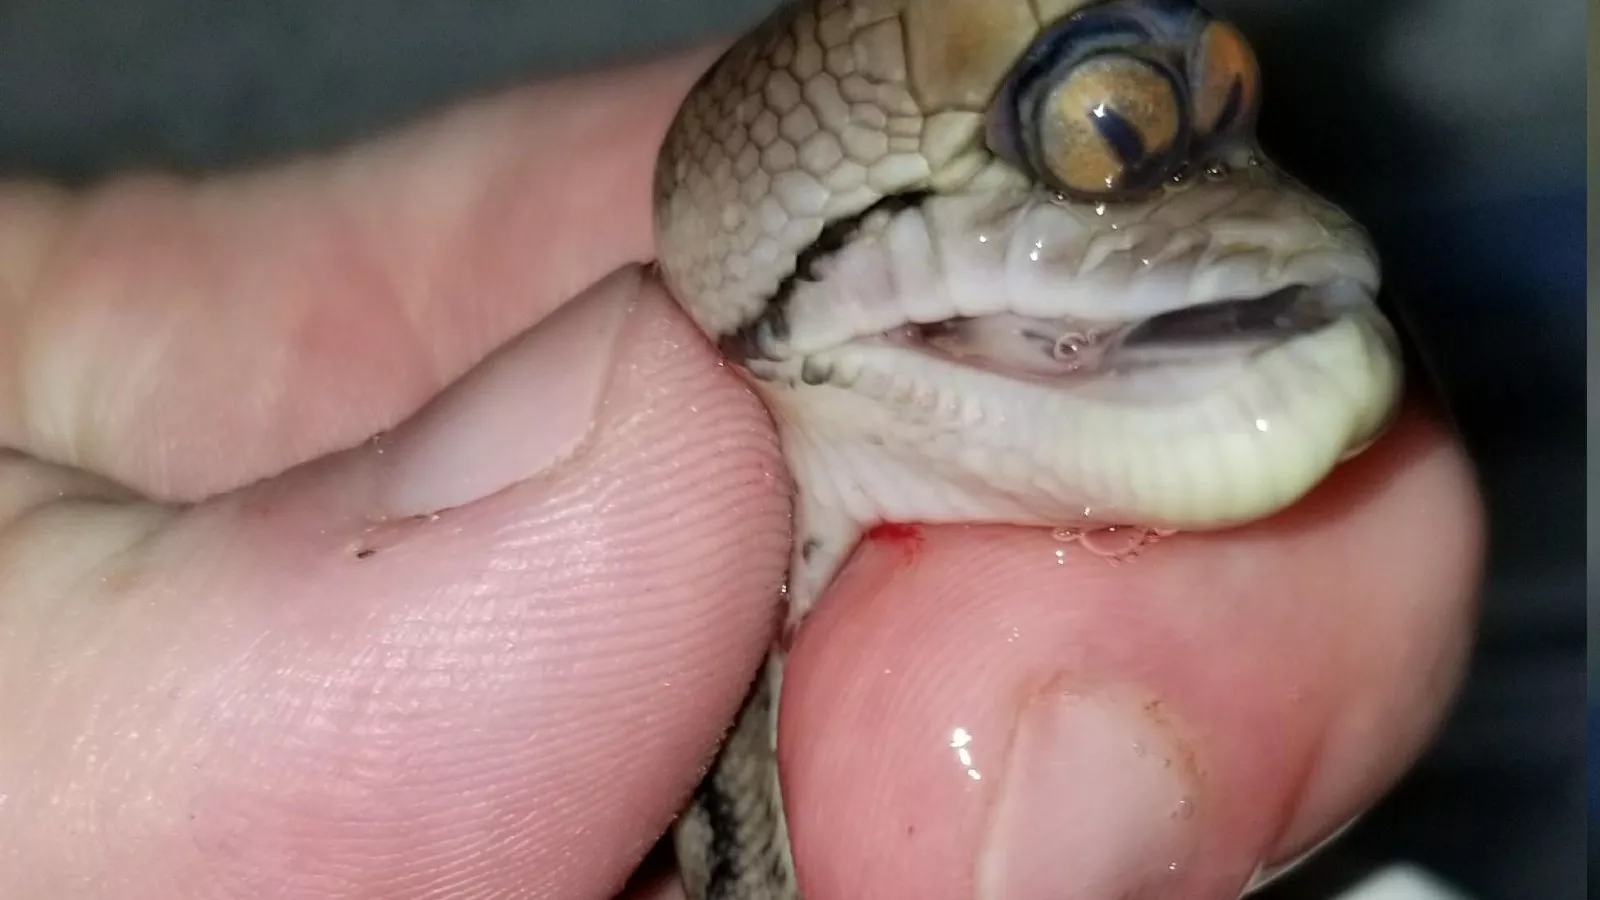 Photos: Mutant 'Cyclops' Snake Discovered in Mississippi Has Two Eyes in  One Socket